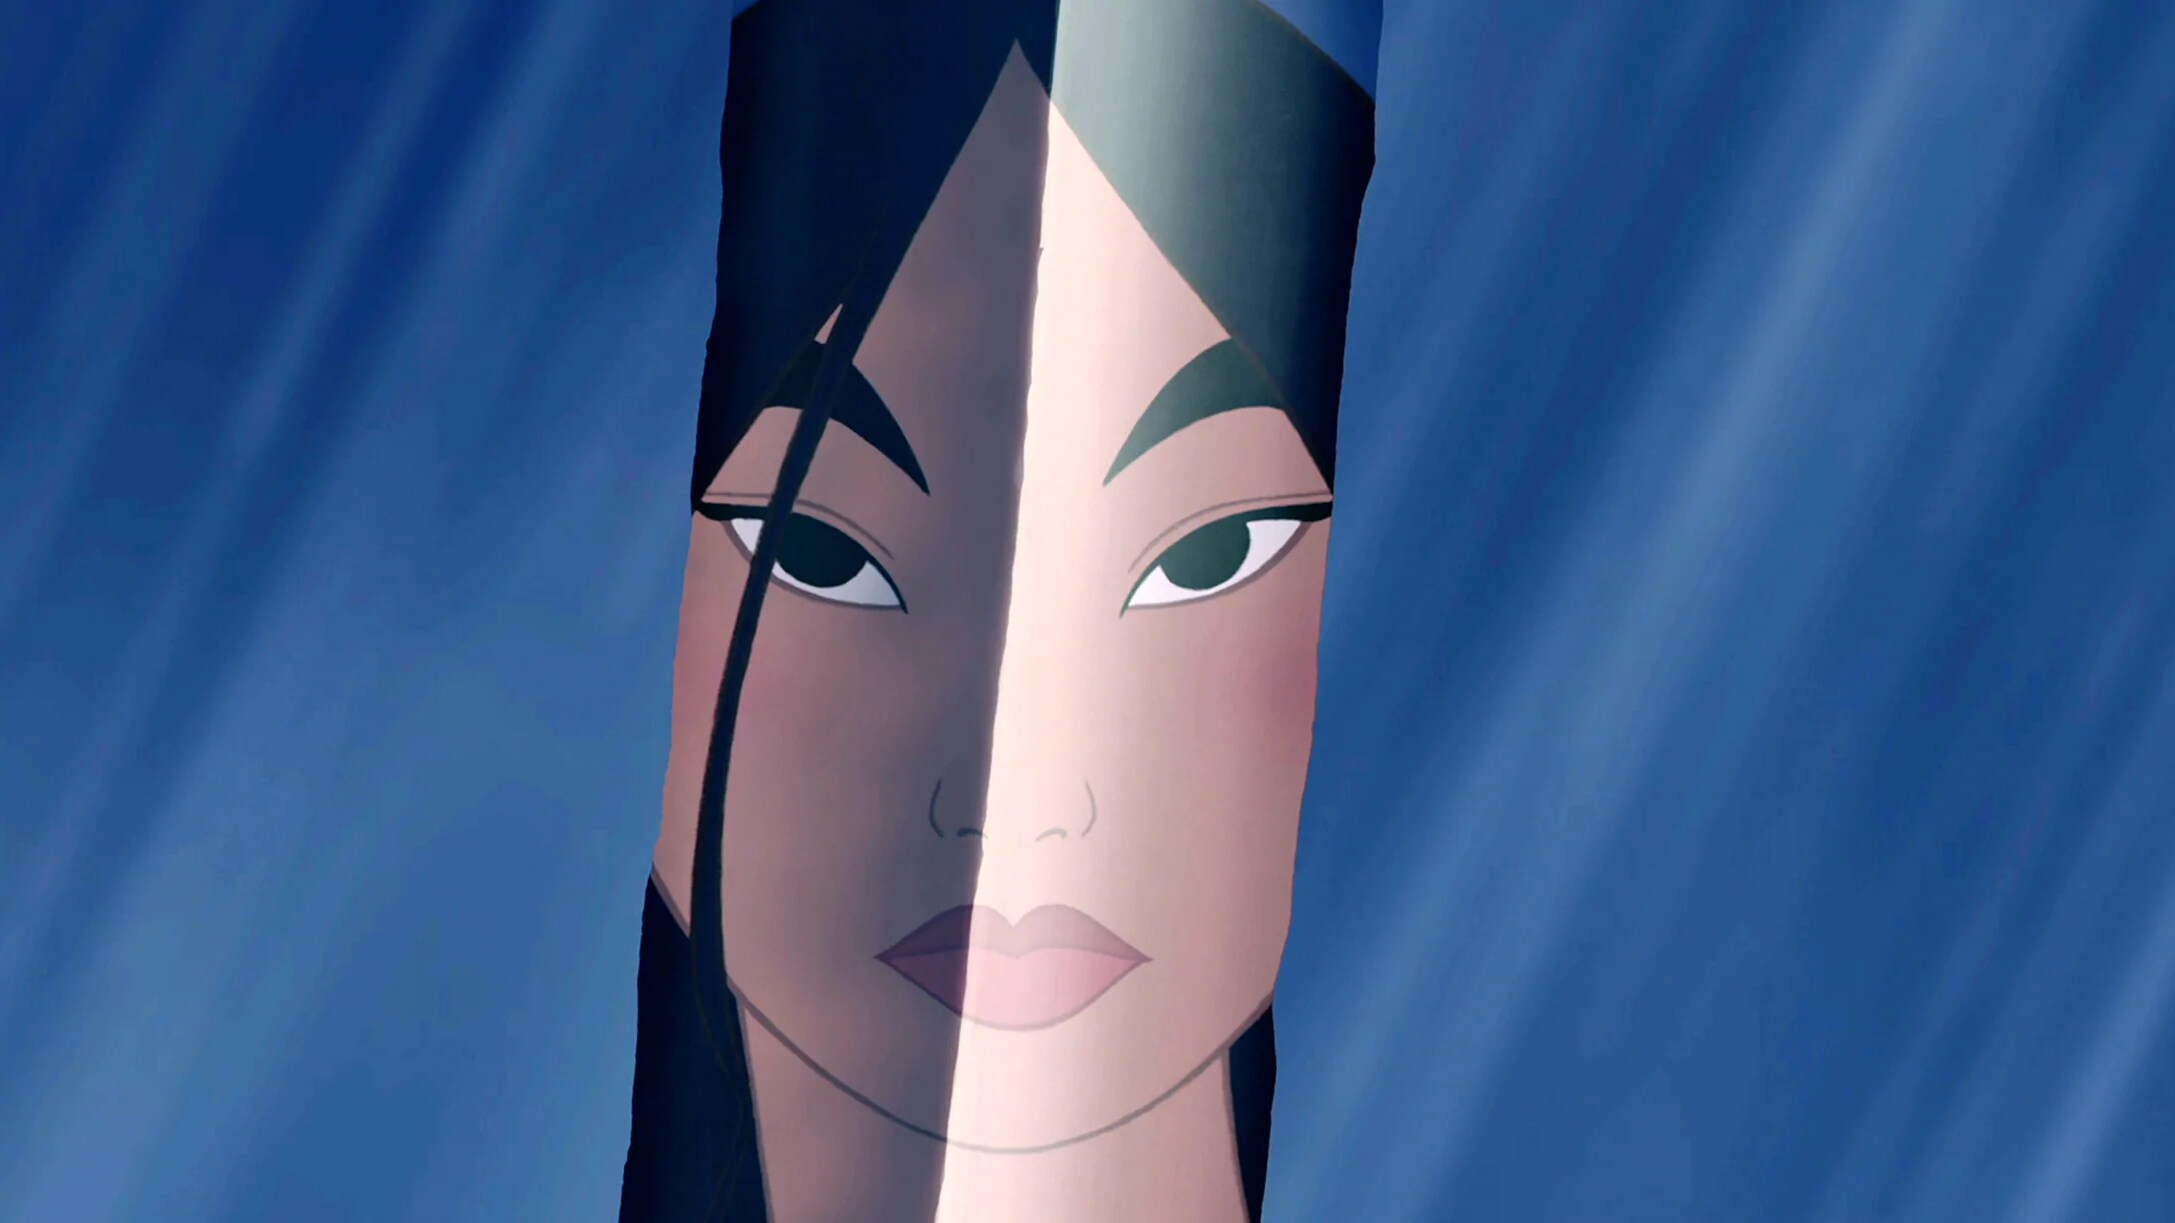 Mulan's reflection in her sword.